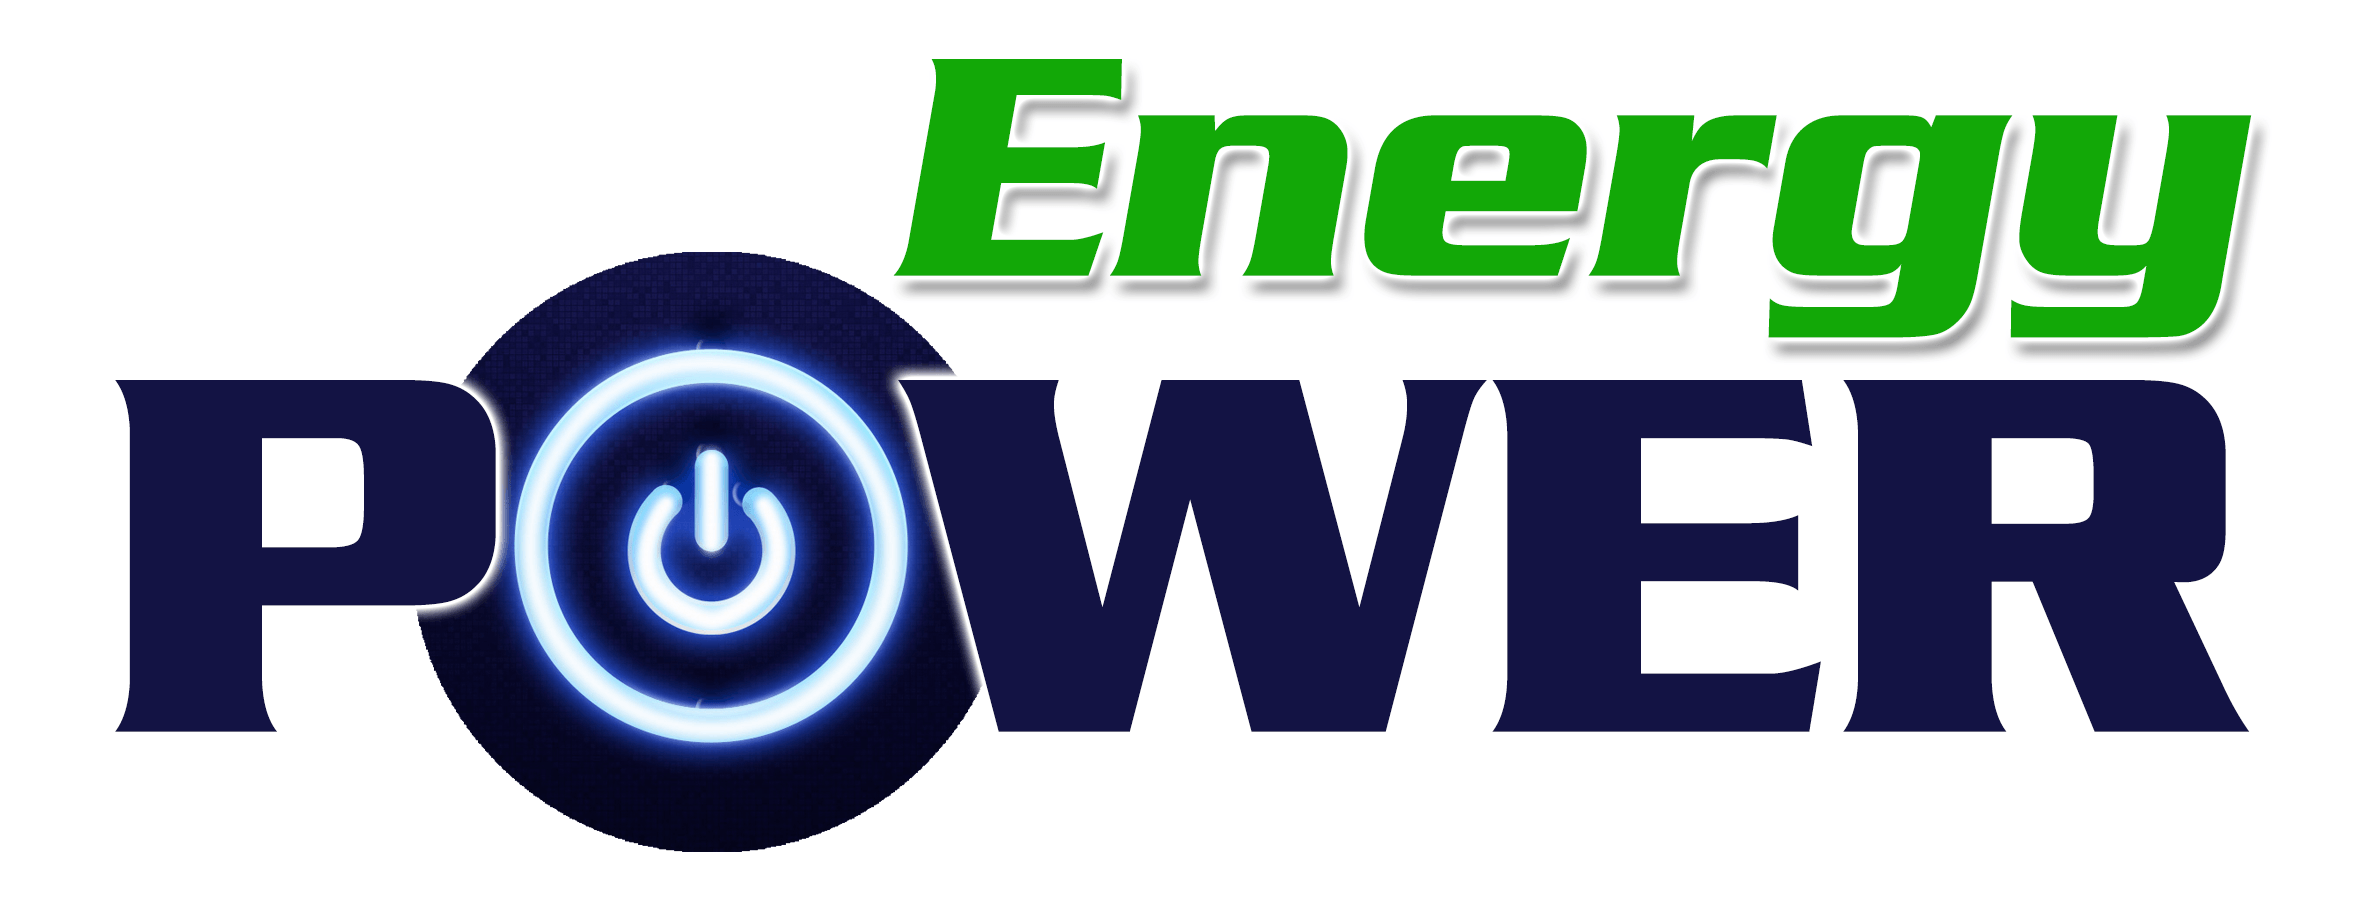 Power Logo - About Us - Energy Power